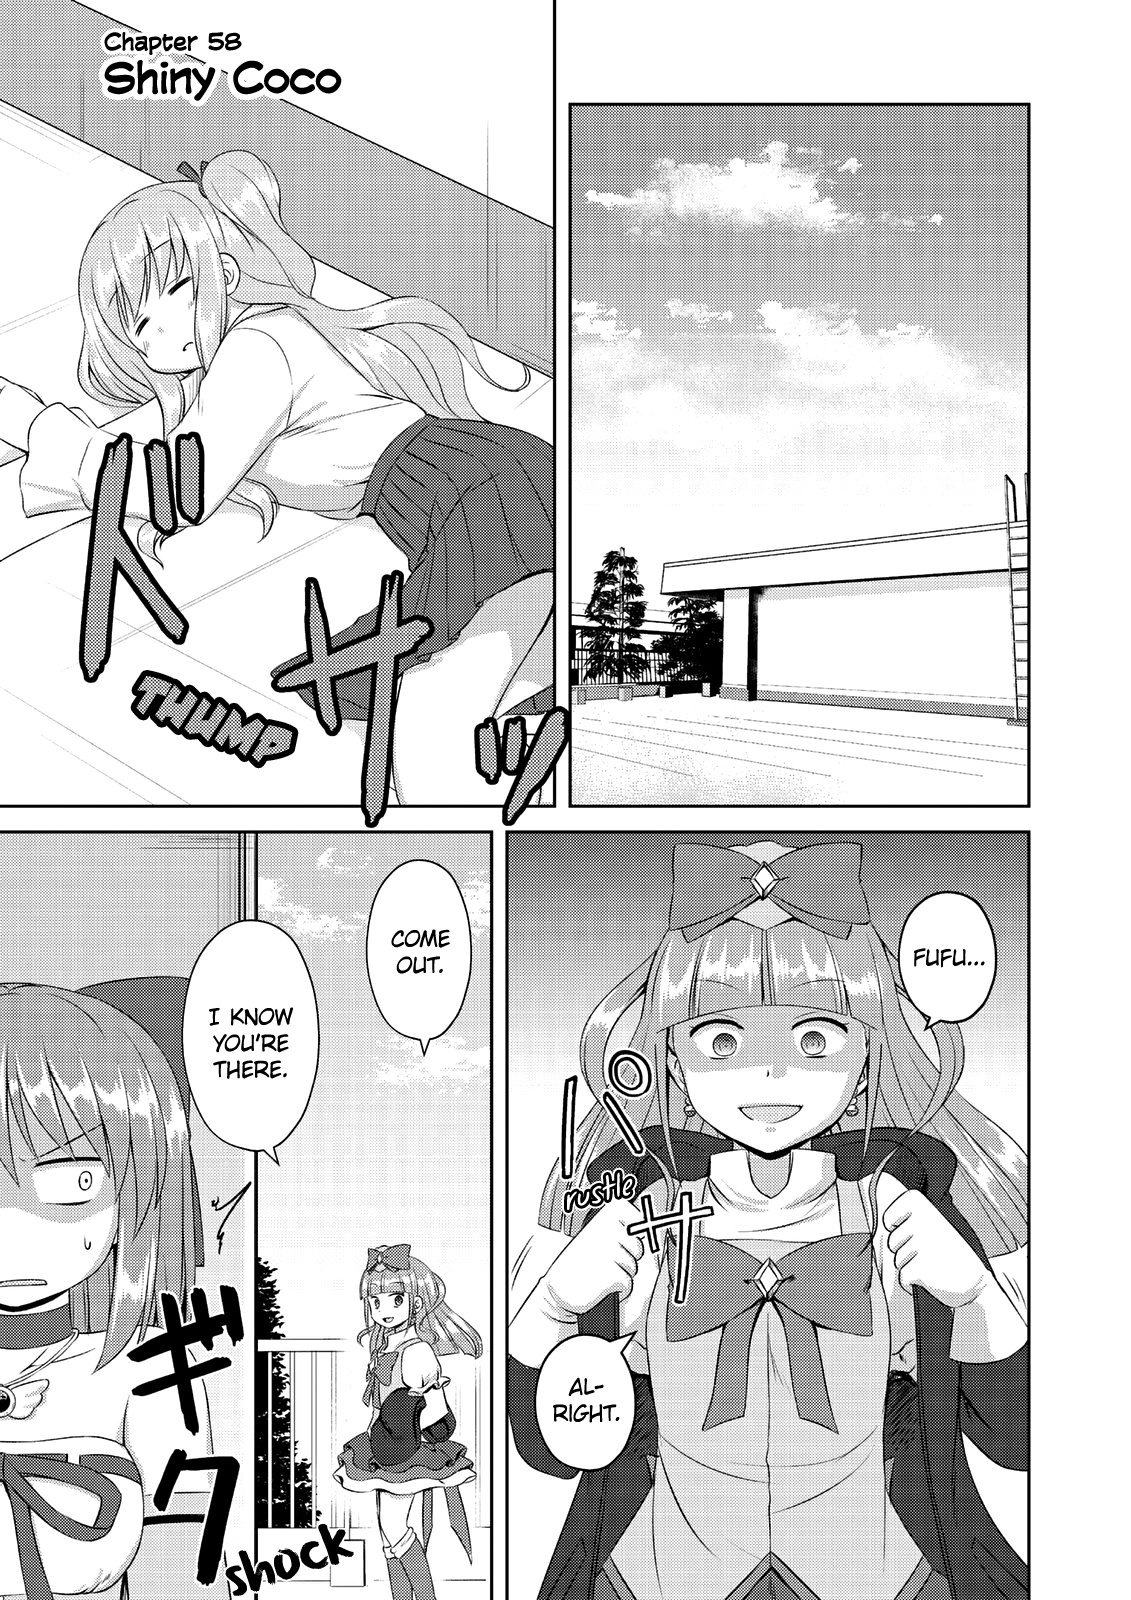 Magical Trans! Vol.6 Chapter 58: Shiny Coco - Picture 1